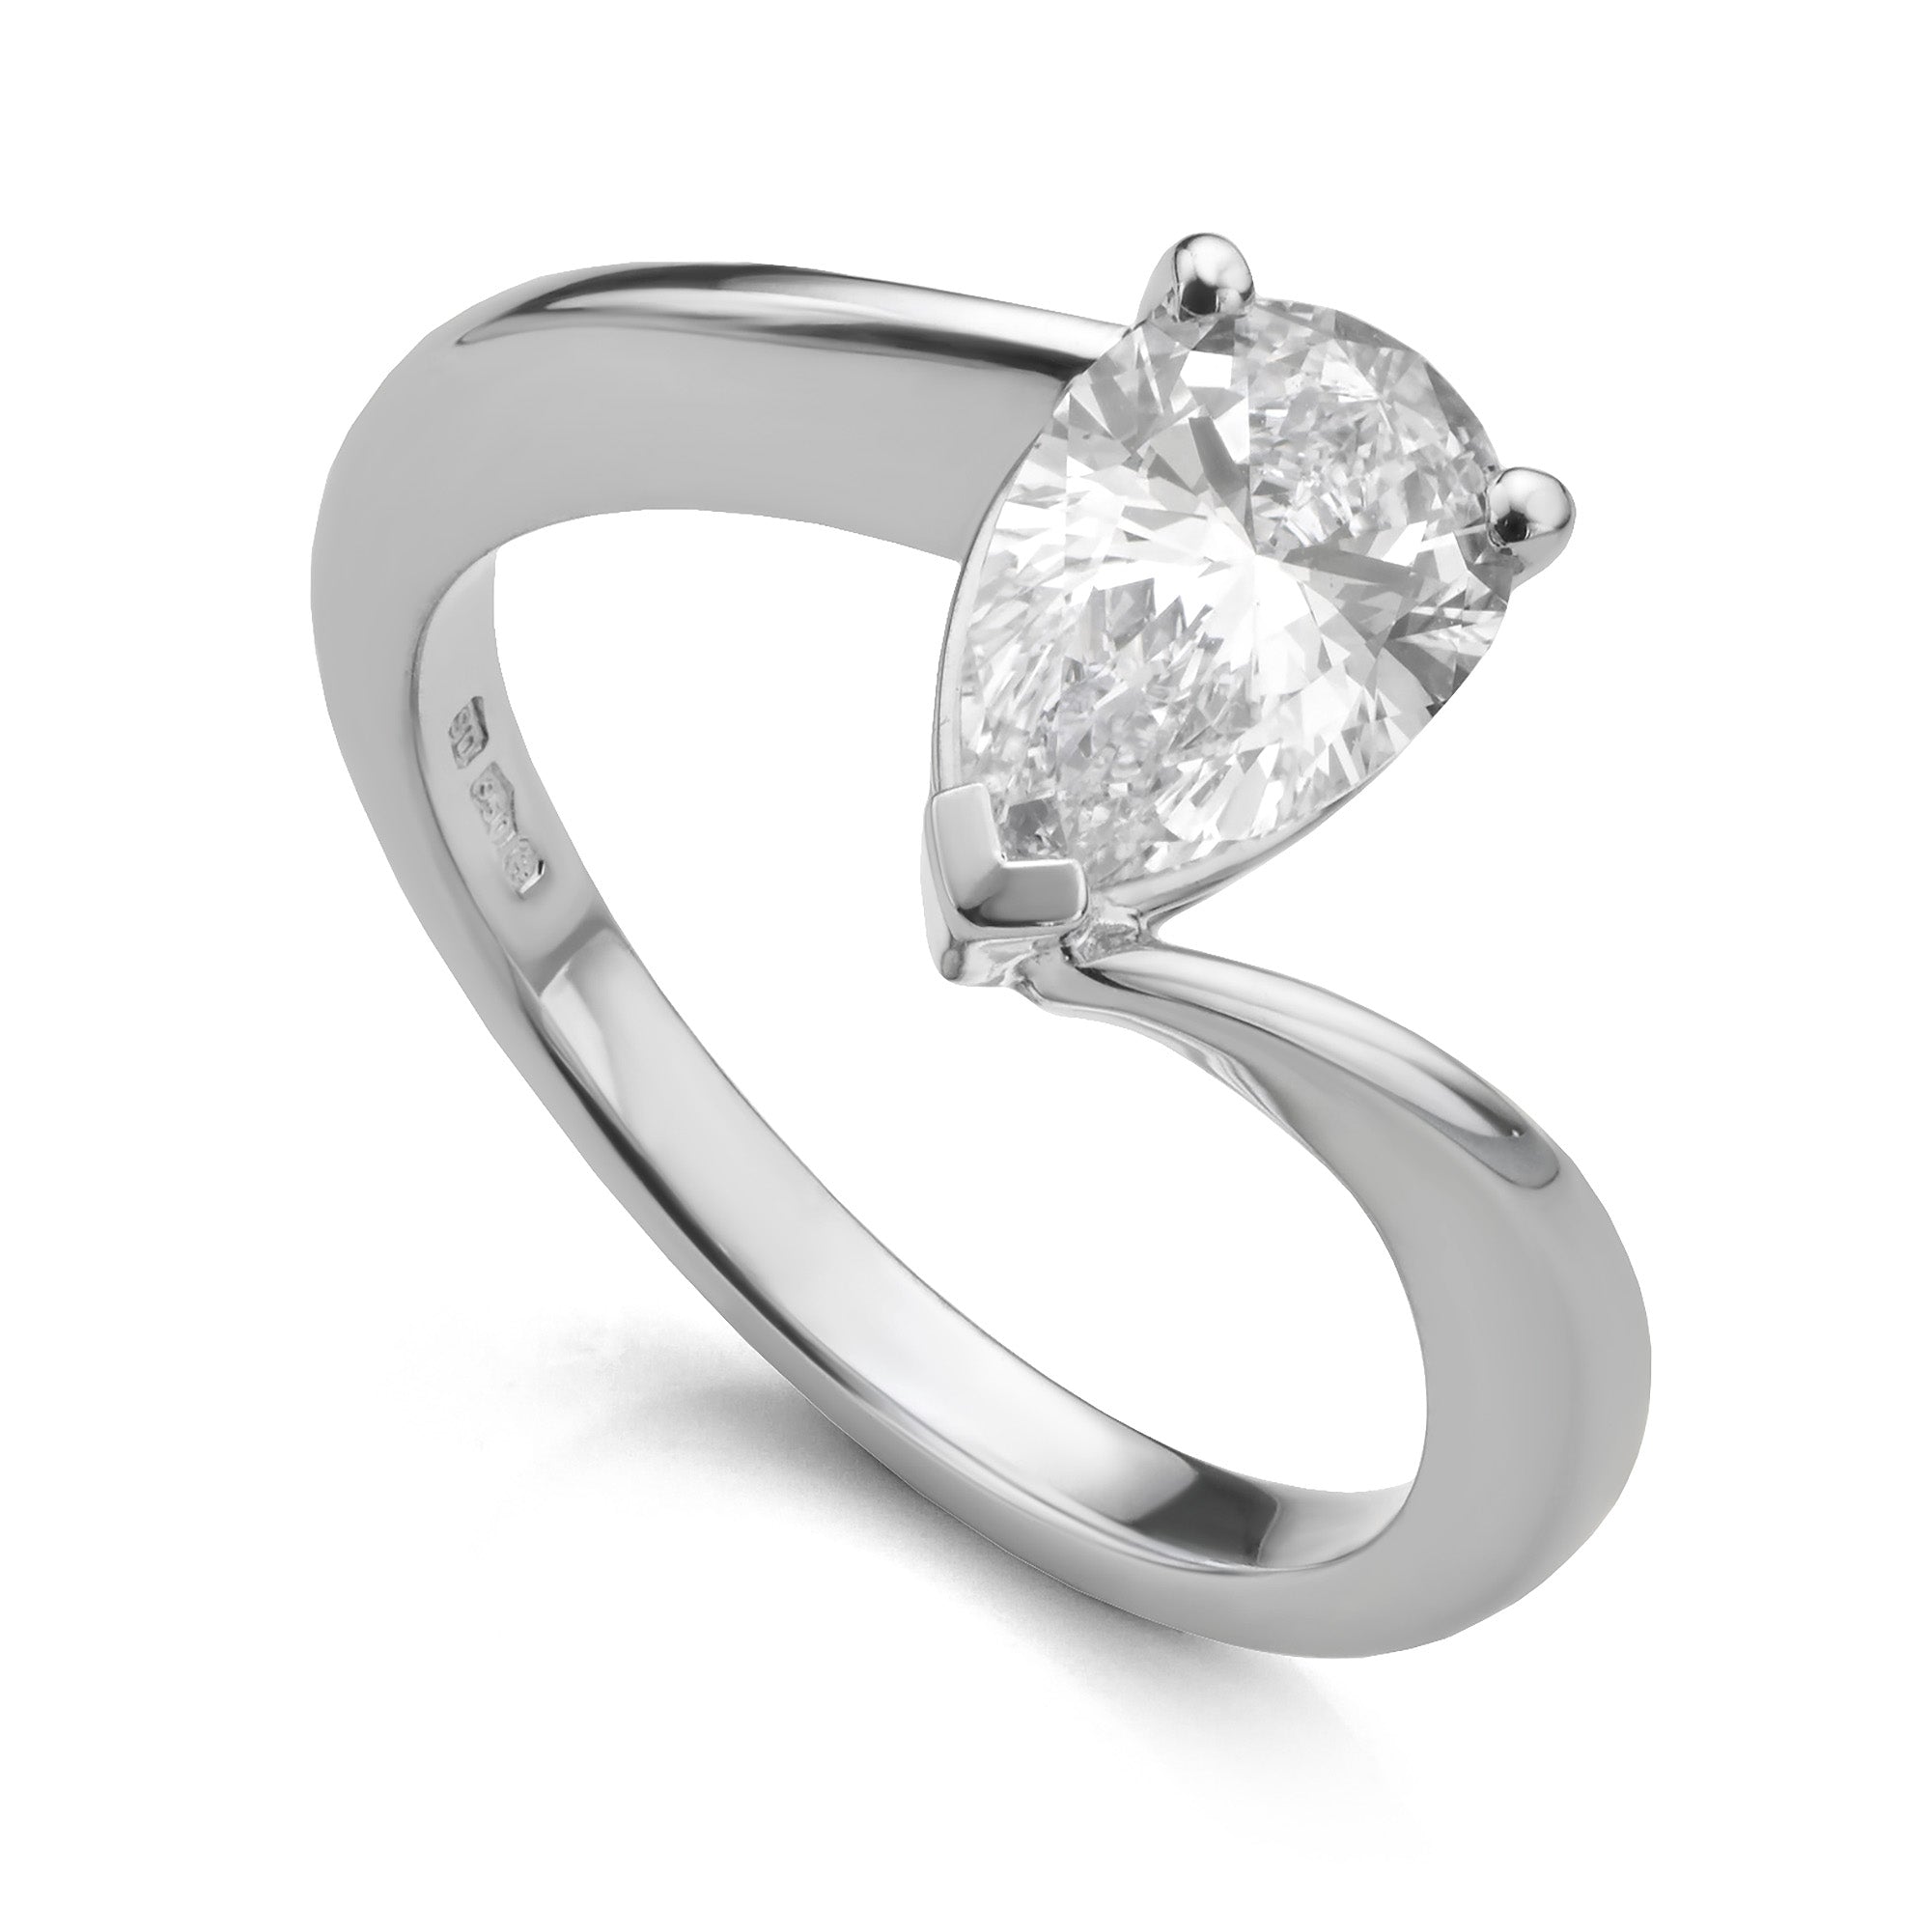 Lab-grown pear-shaped diamond engagement ring main view